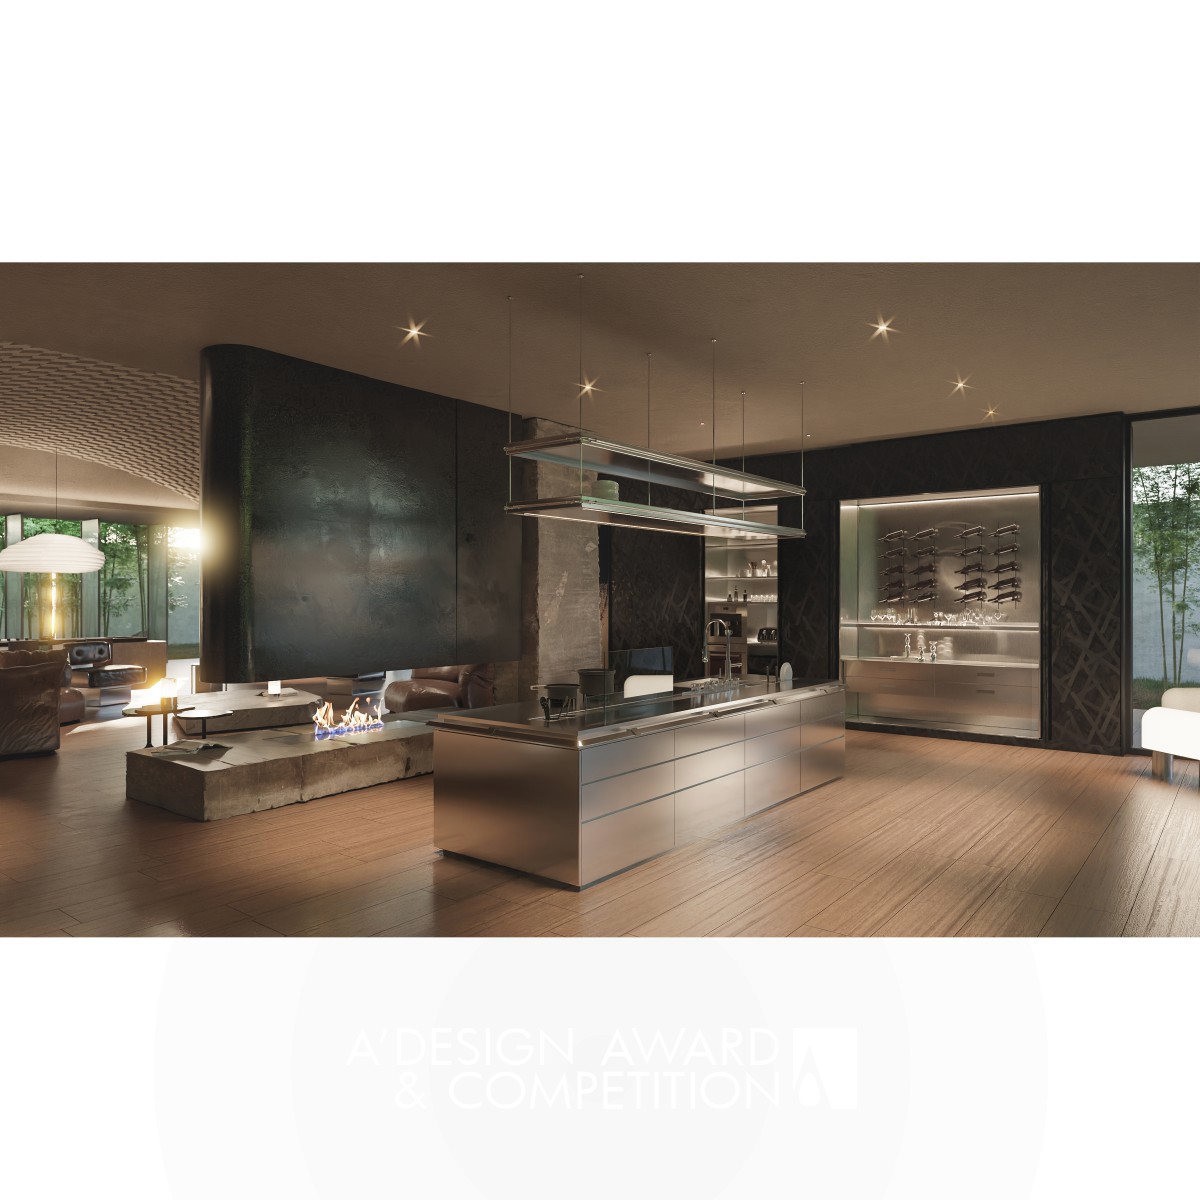 Guangzhou Holike Creative Home Co.,Ltd. wins Golden at the prestigious A' Kitchen Furniture, Equipment and Fixtures Design Award with HD Mengyin Black Golden Kitchen Cabinet.